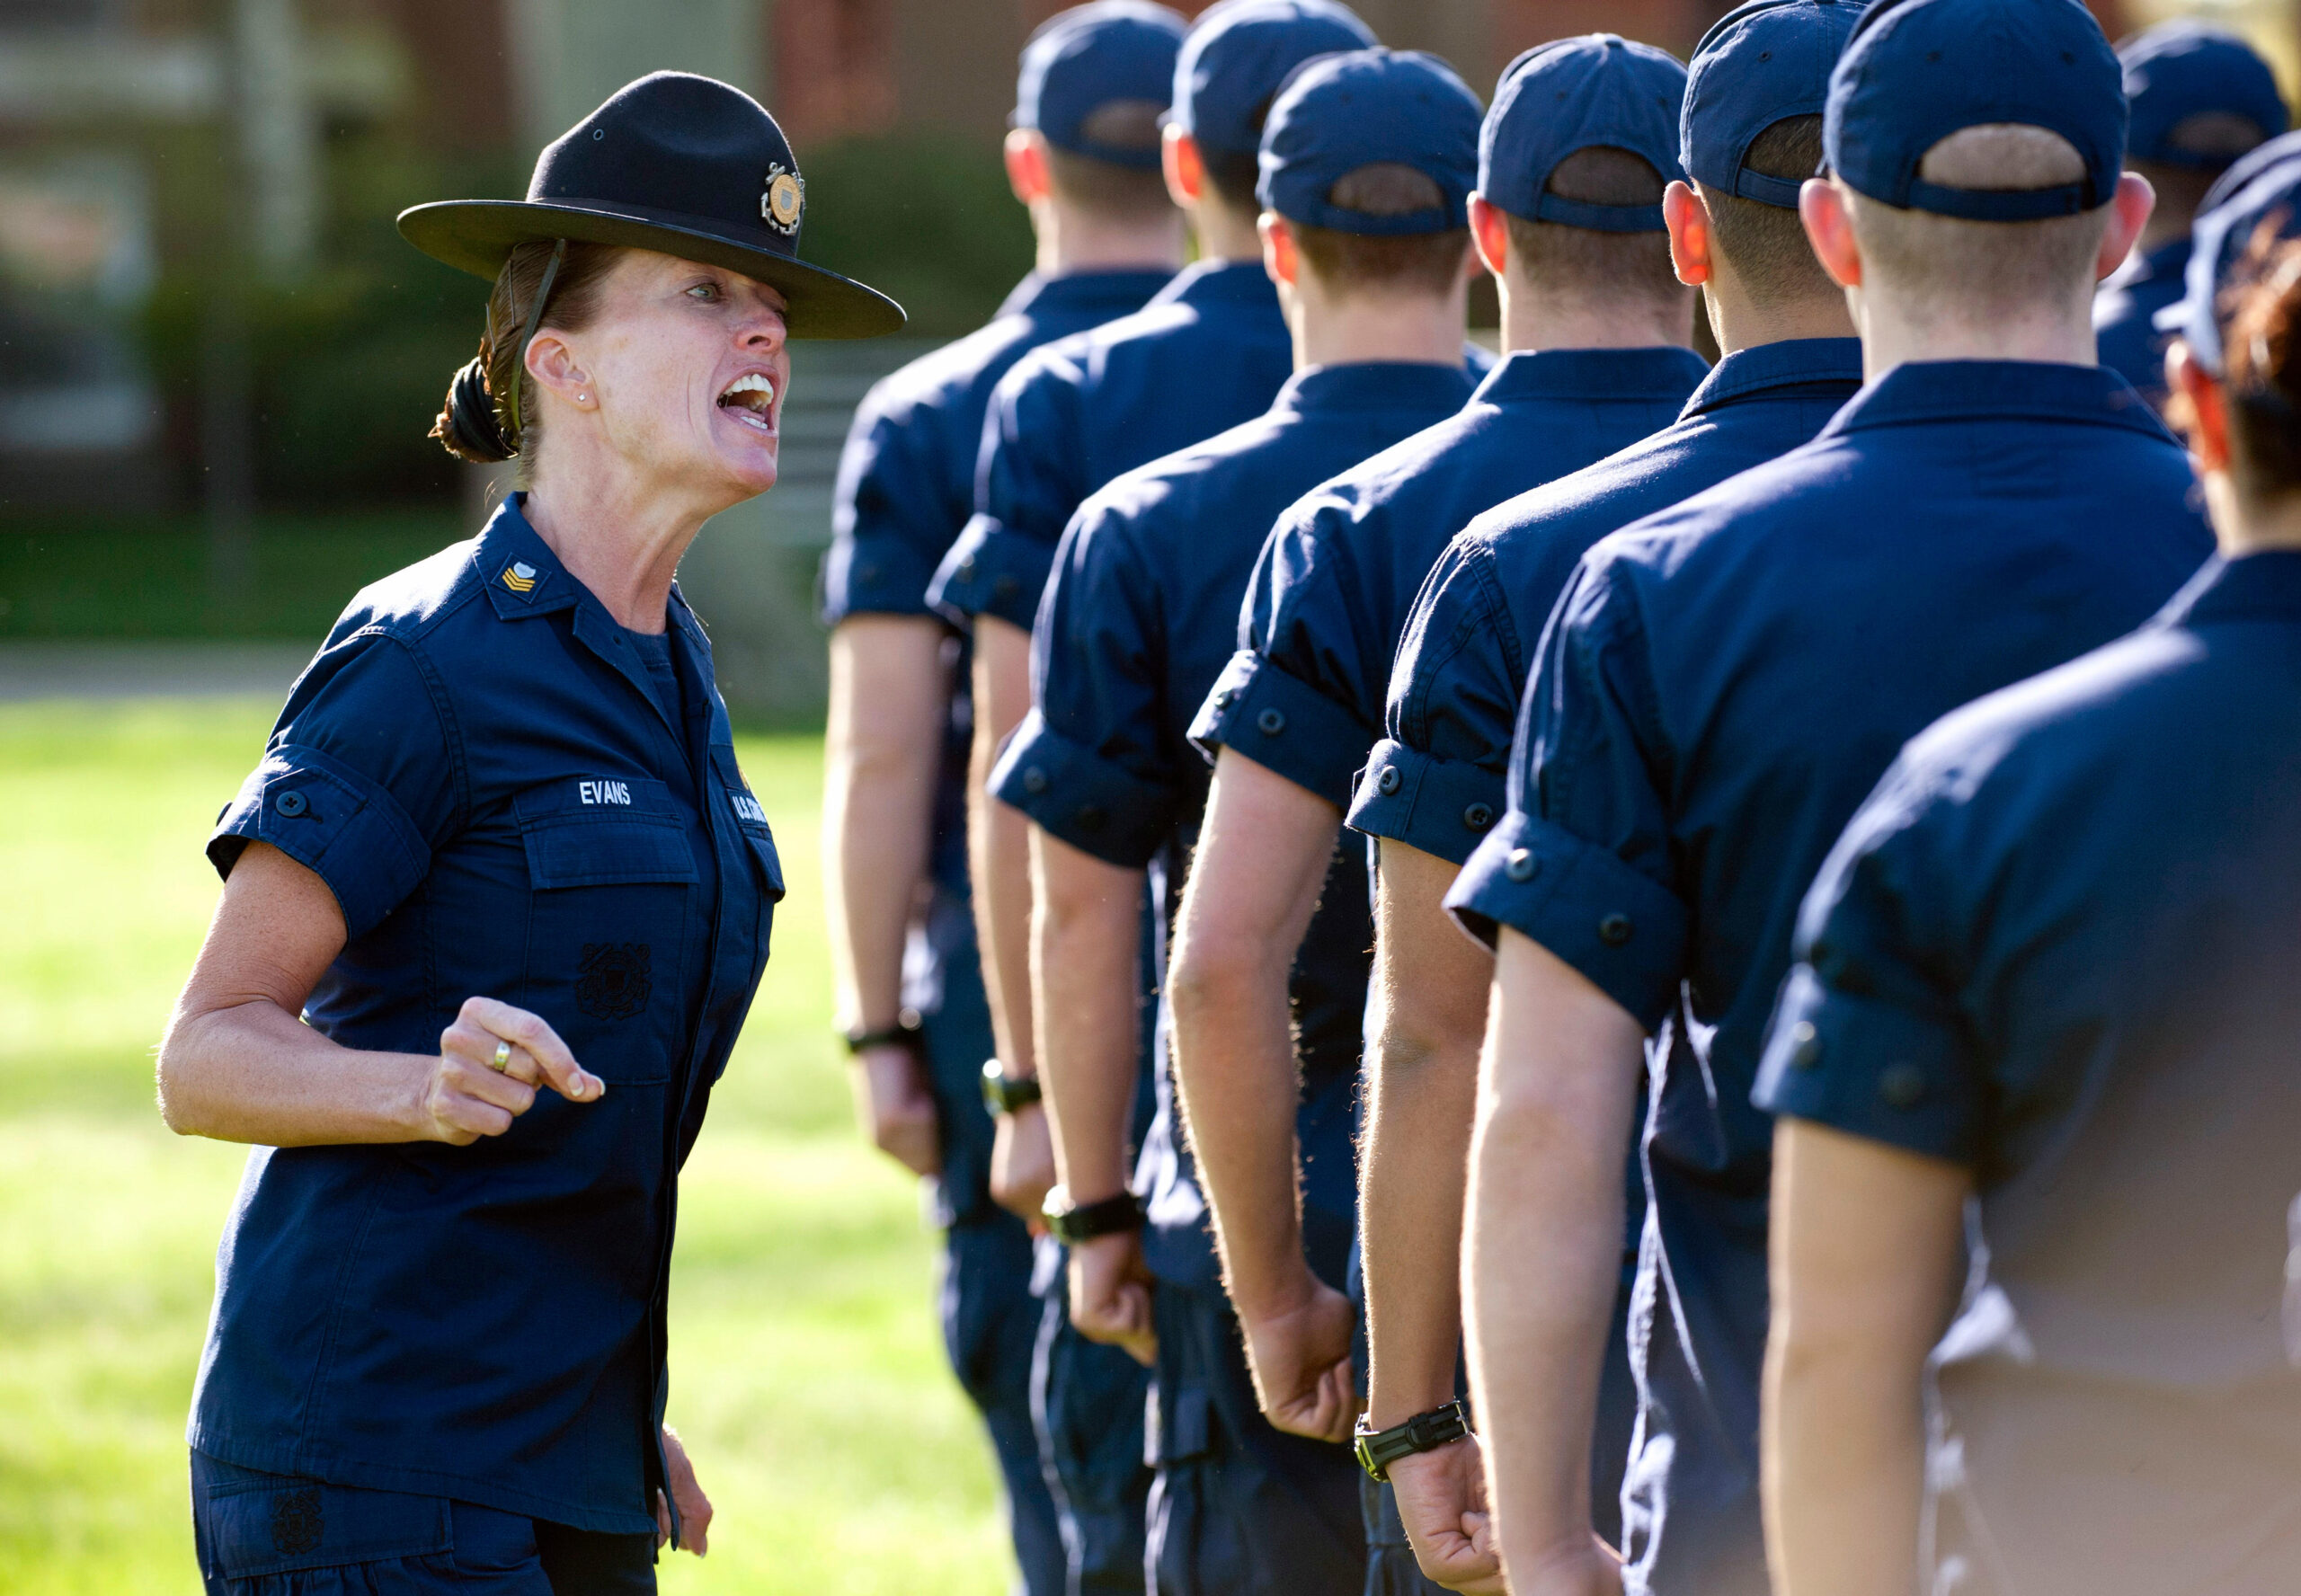 Photo: Drill sergeant motivates a group of cadets. Photo from rear of cadet grouping.